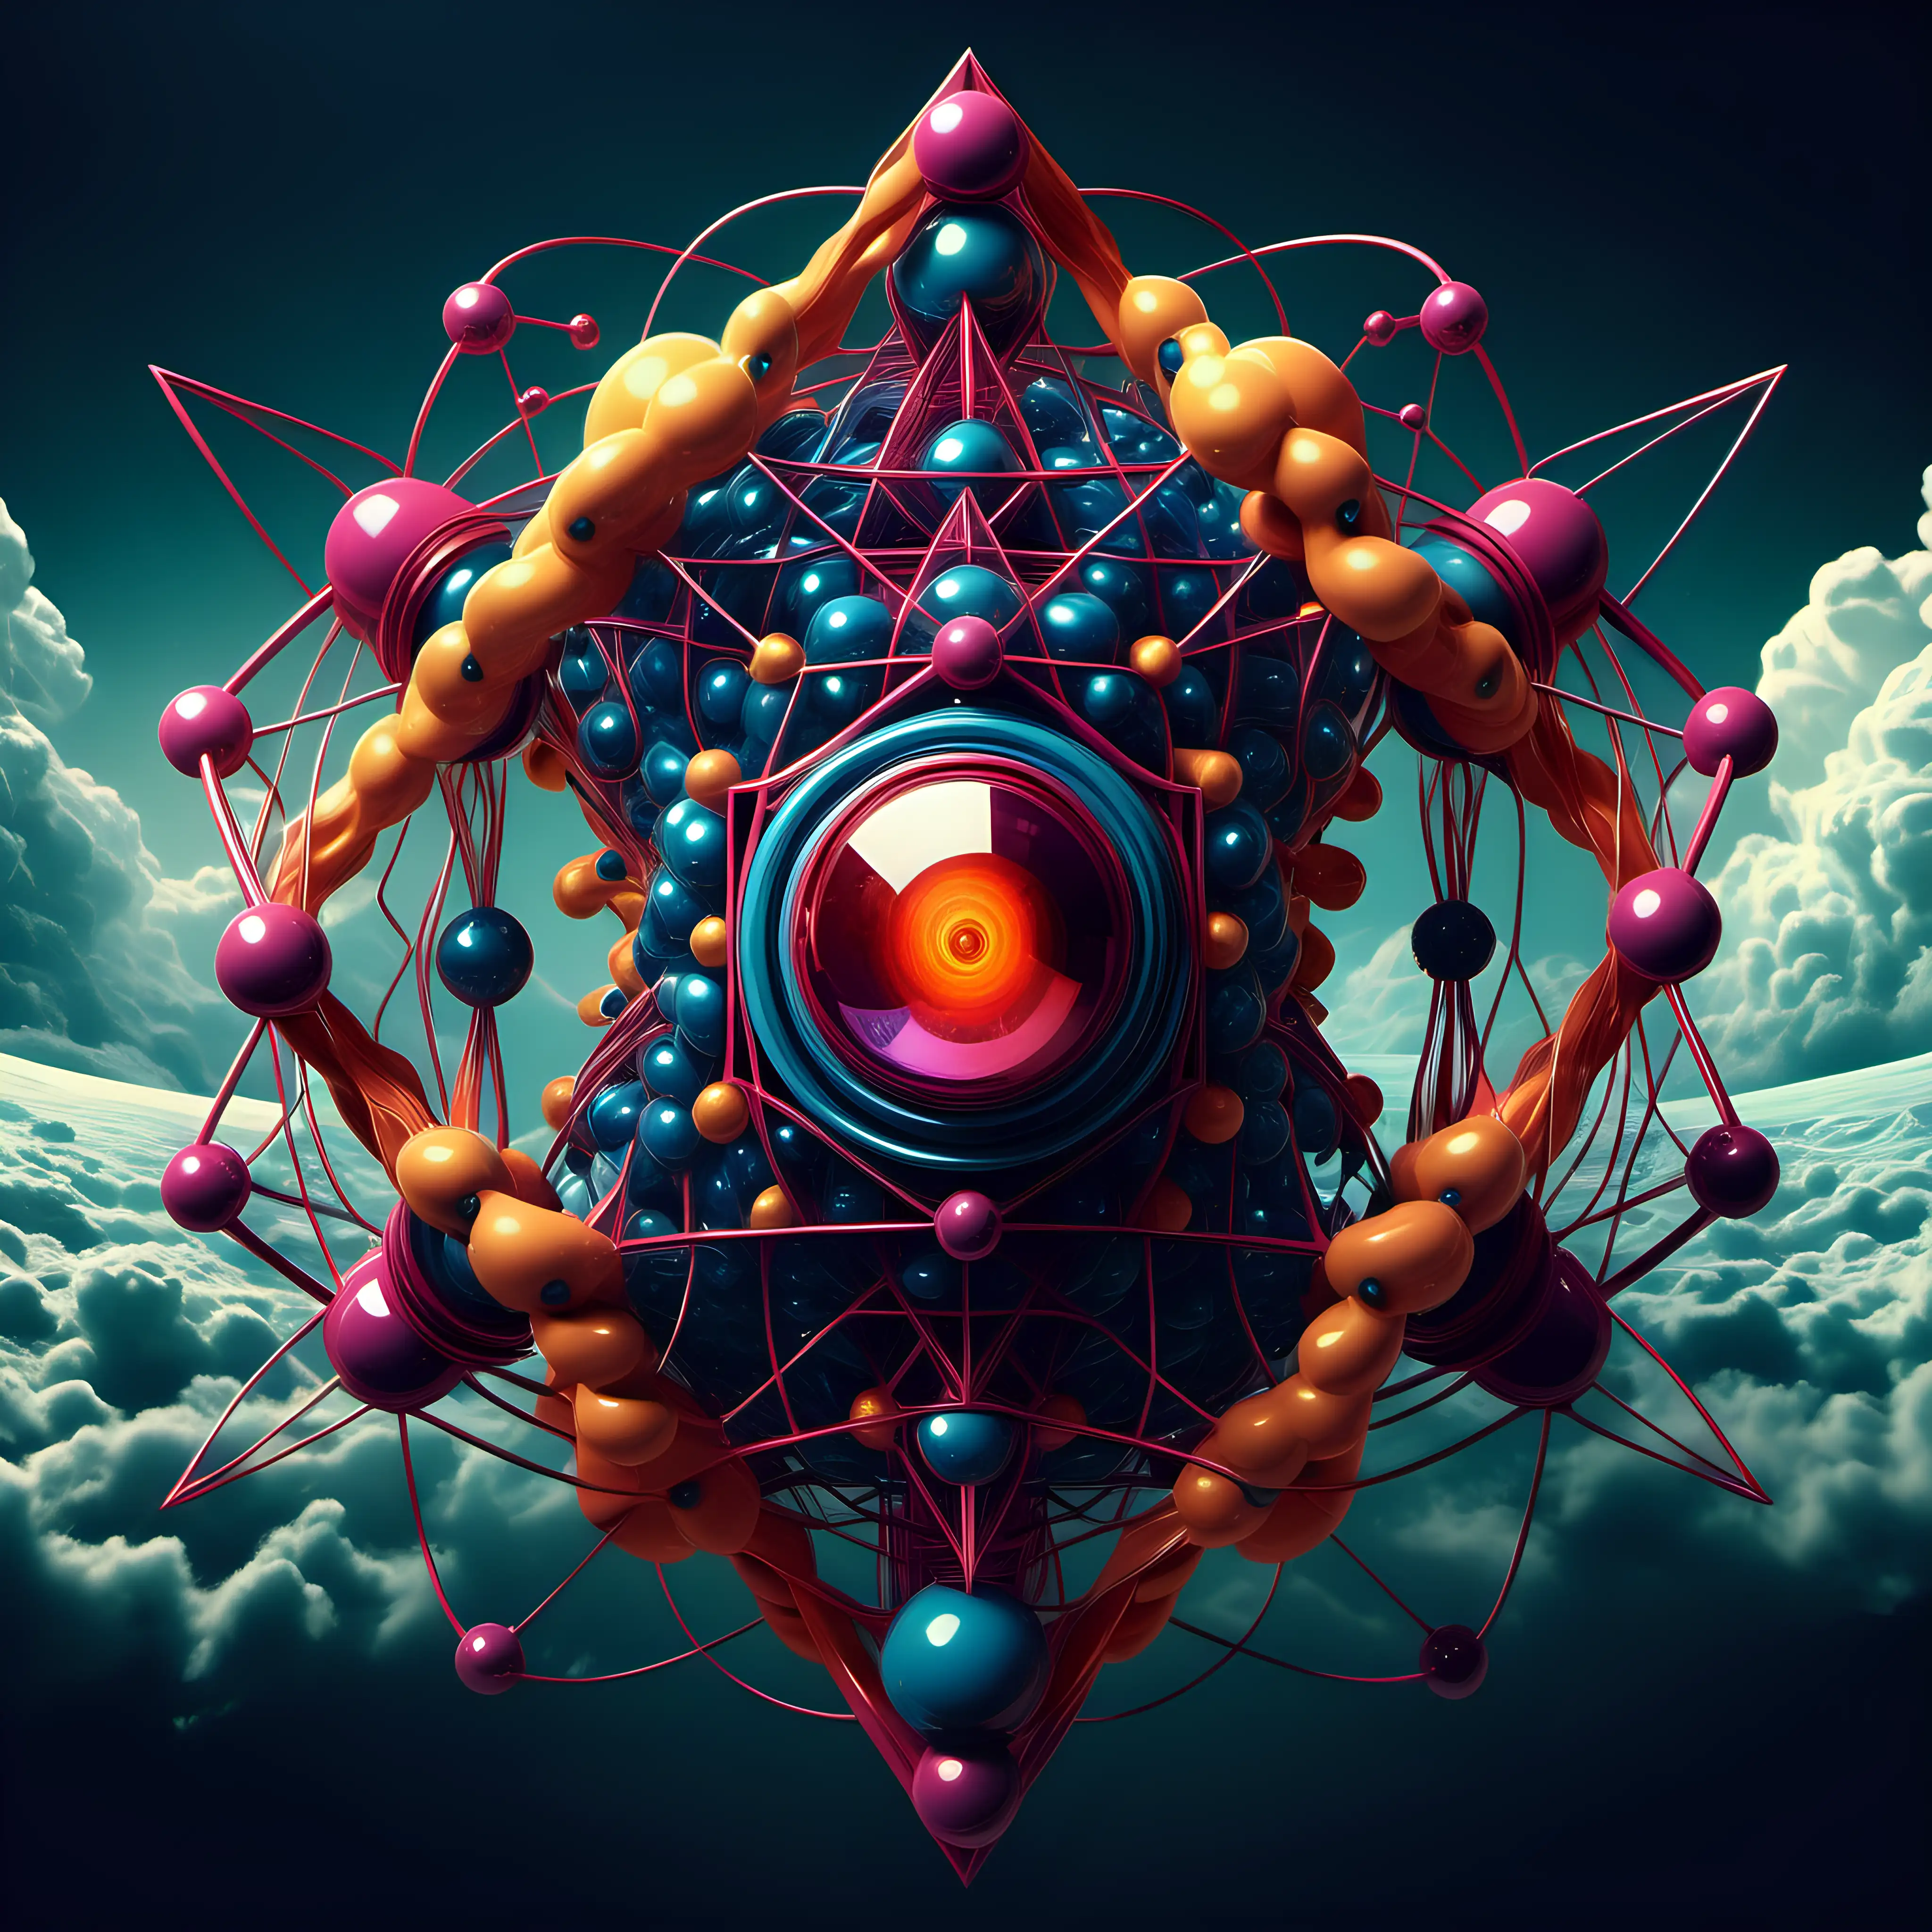 Surreal Fusion of Abstract Protons in Geometric Realism with Bold Colors